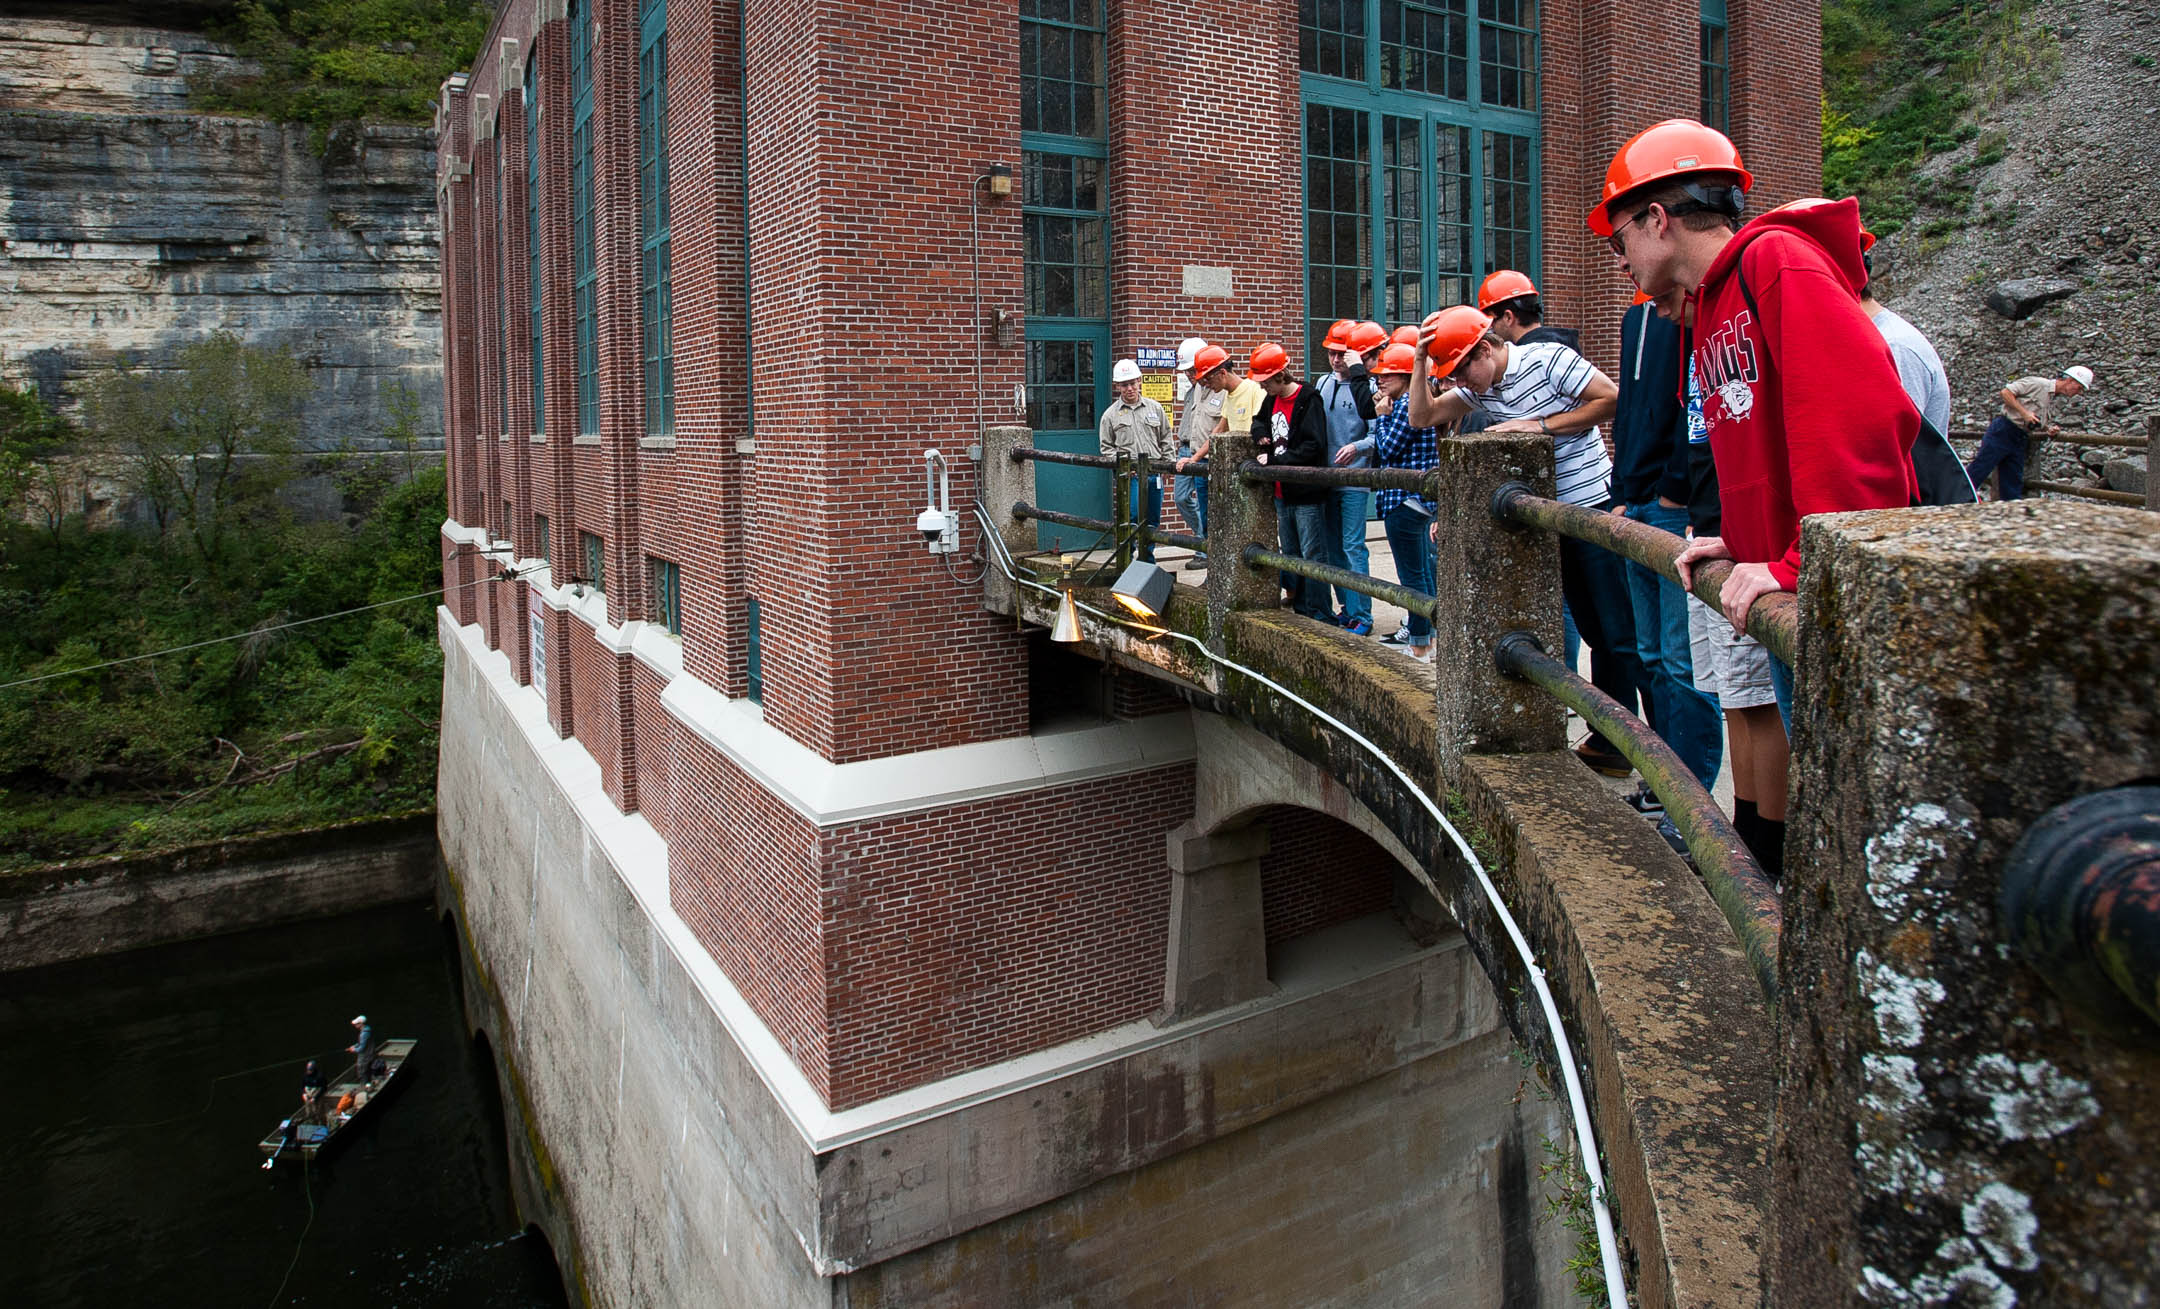 High school students from Burgin Independent School tour the Dix Dam hydroelectric plant at Kentucky Utilities' E.W. Brown Generating Station in Mercer County. Students in Chad Terrell's energy and power foundations class visited the plant as part of their study of how water can be used to create electricity. Photo by Bobby Ellis, Sept. 30, 2016